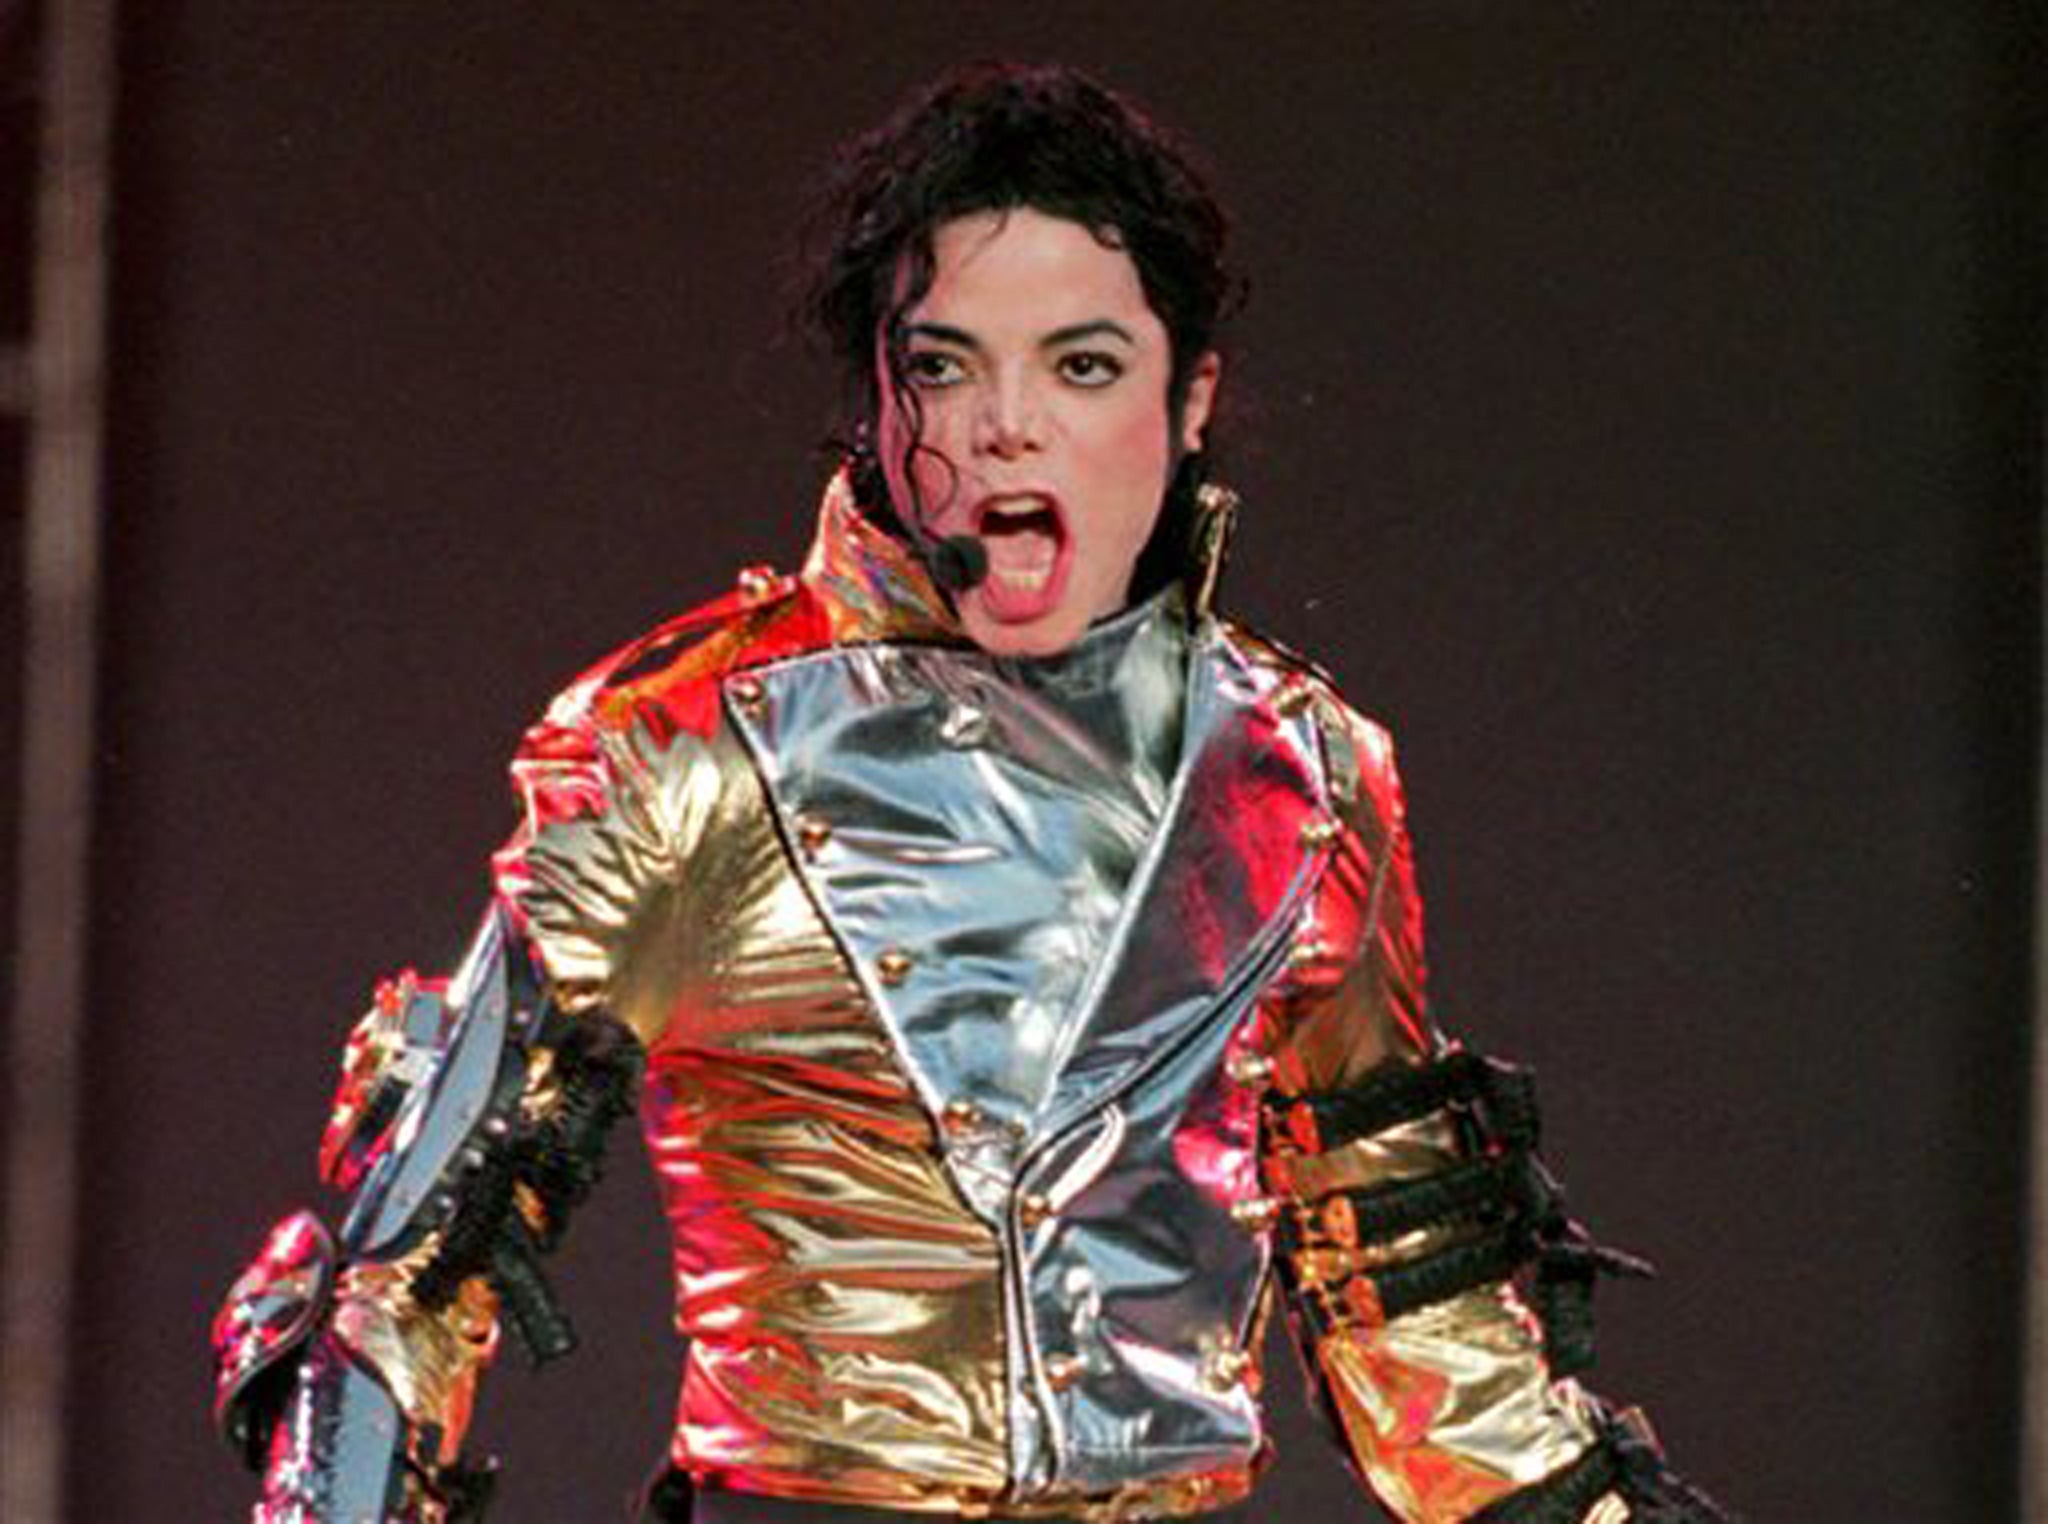 The pop star performs during his "HIStory Tour Part II" tour in 1997